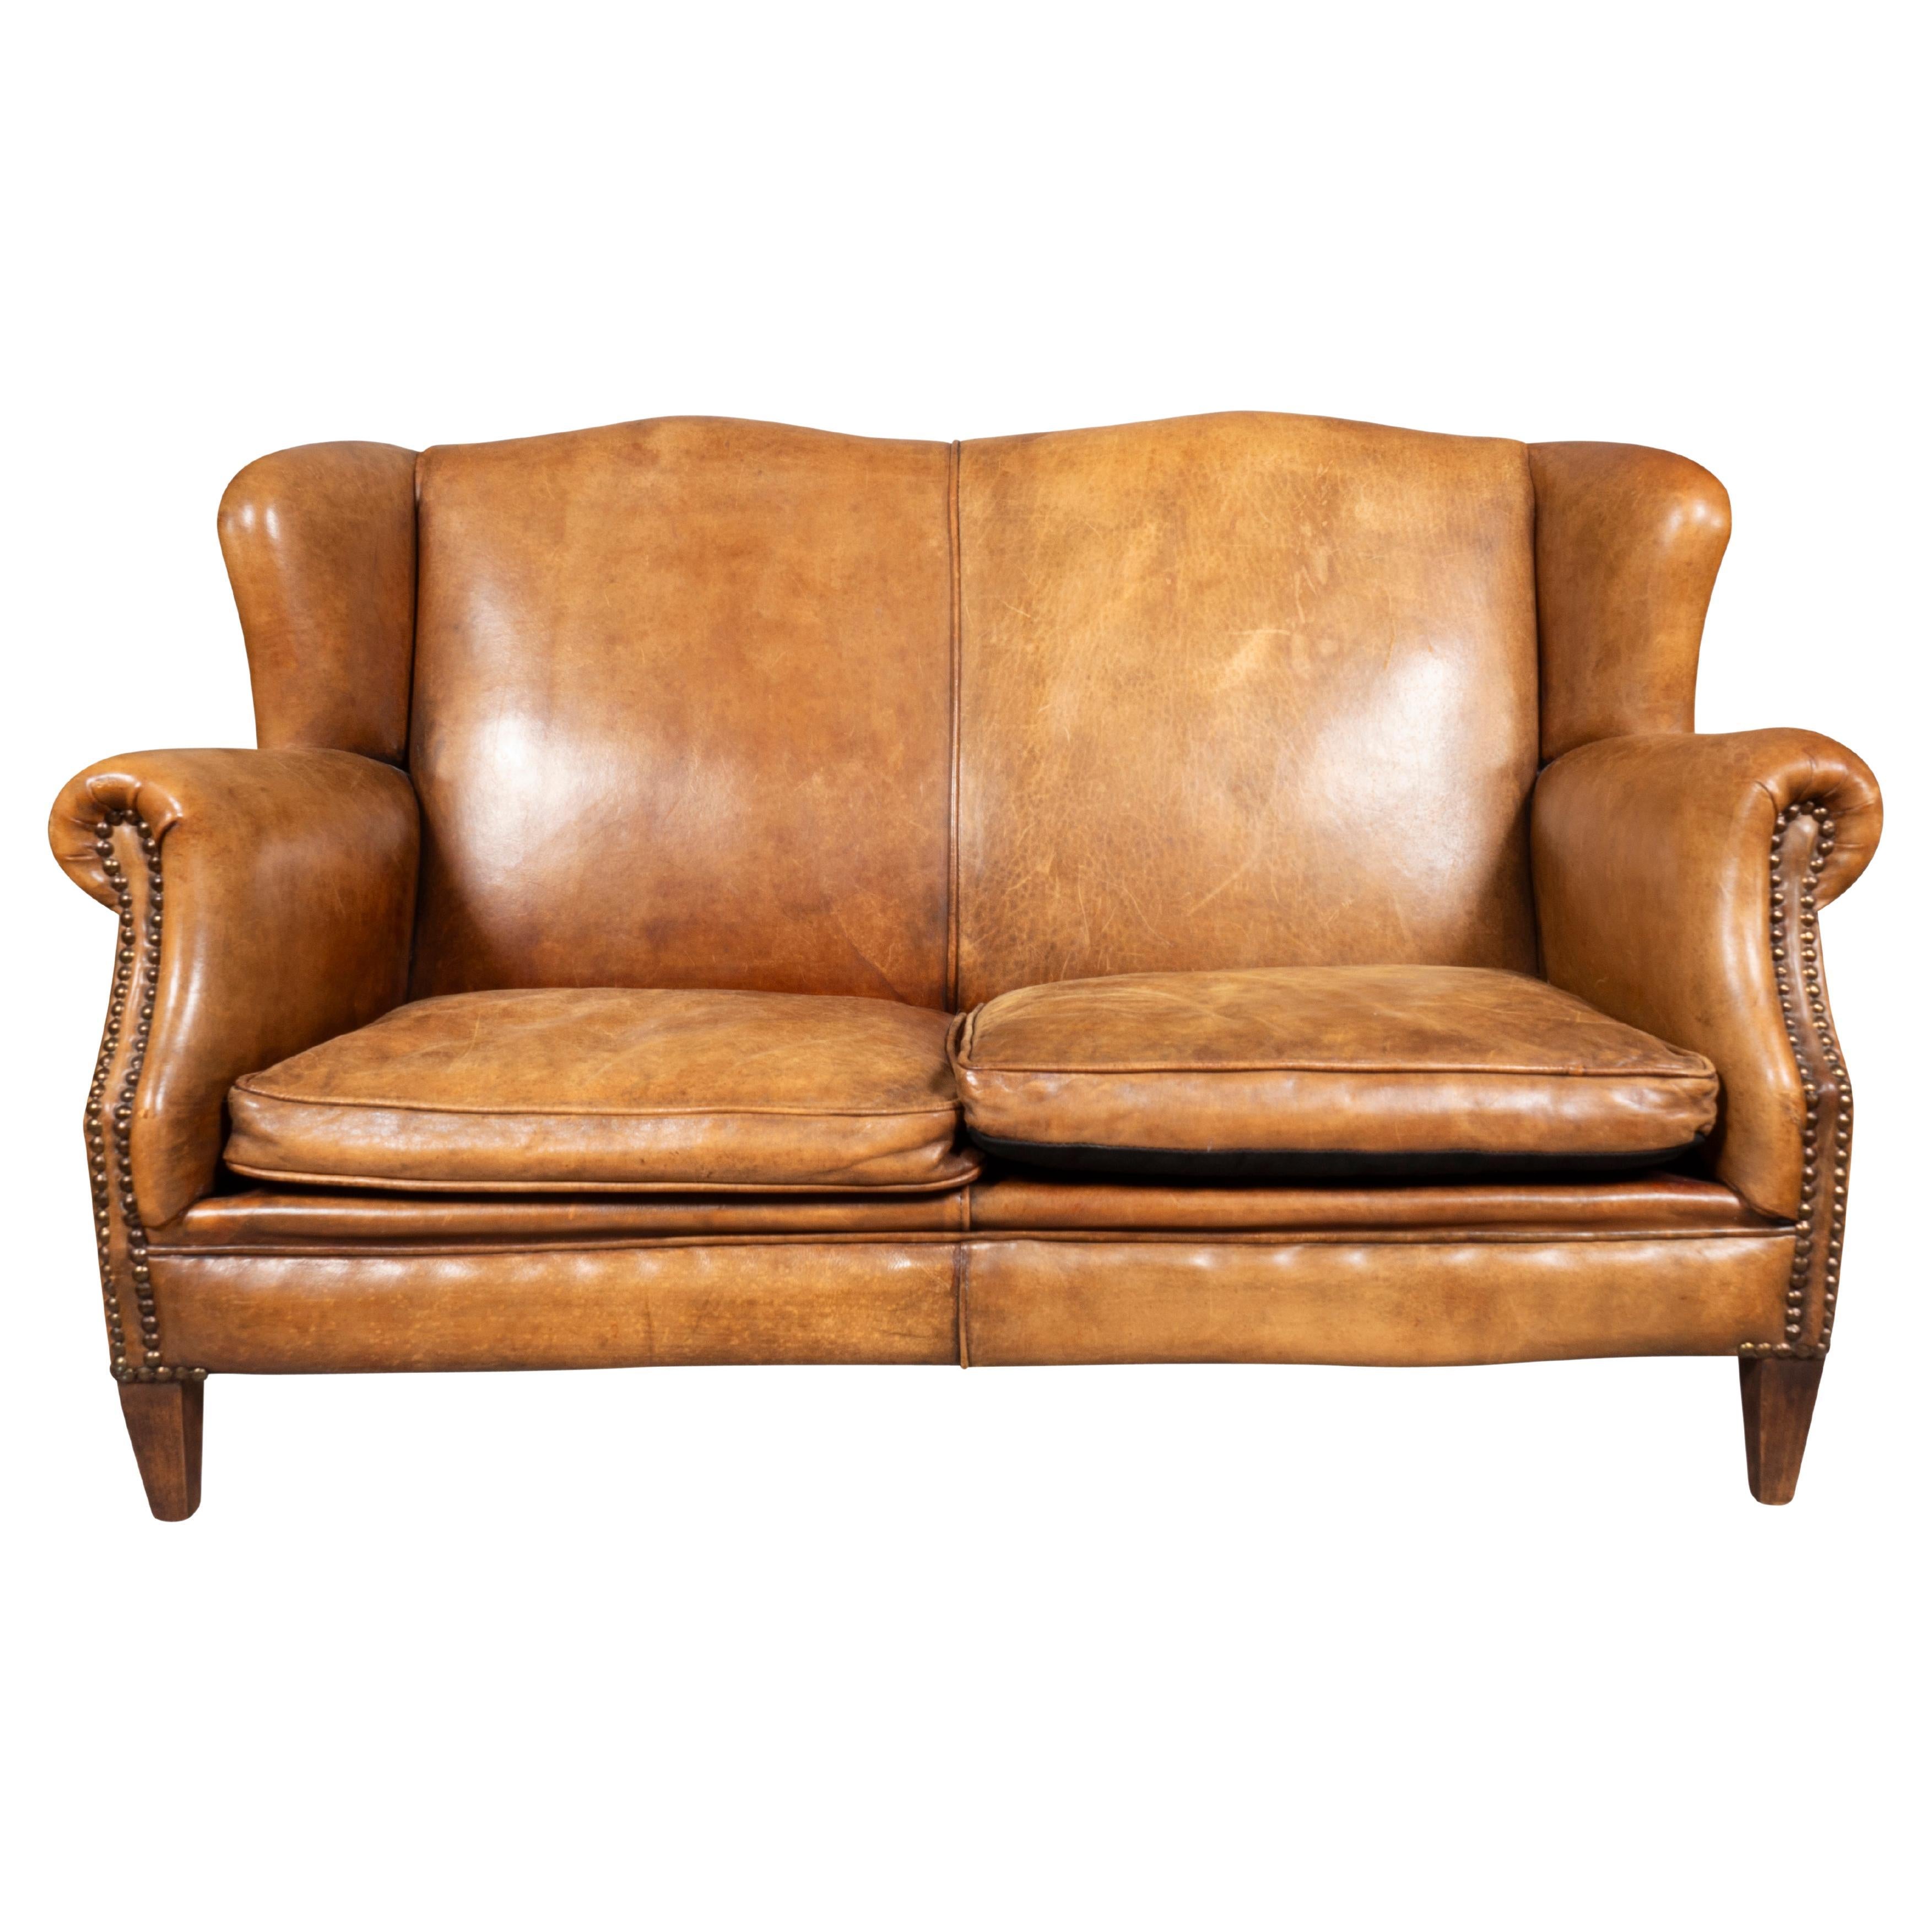 Child Size Brown Leather Sofa For Sale